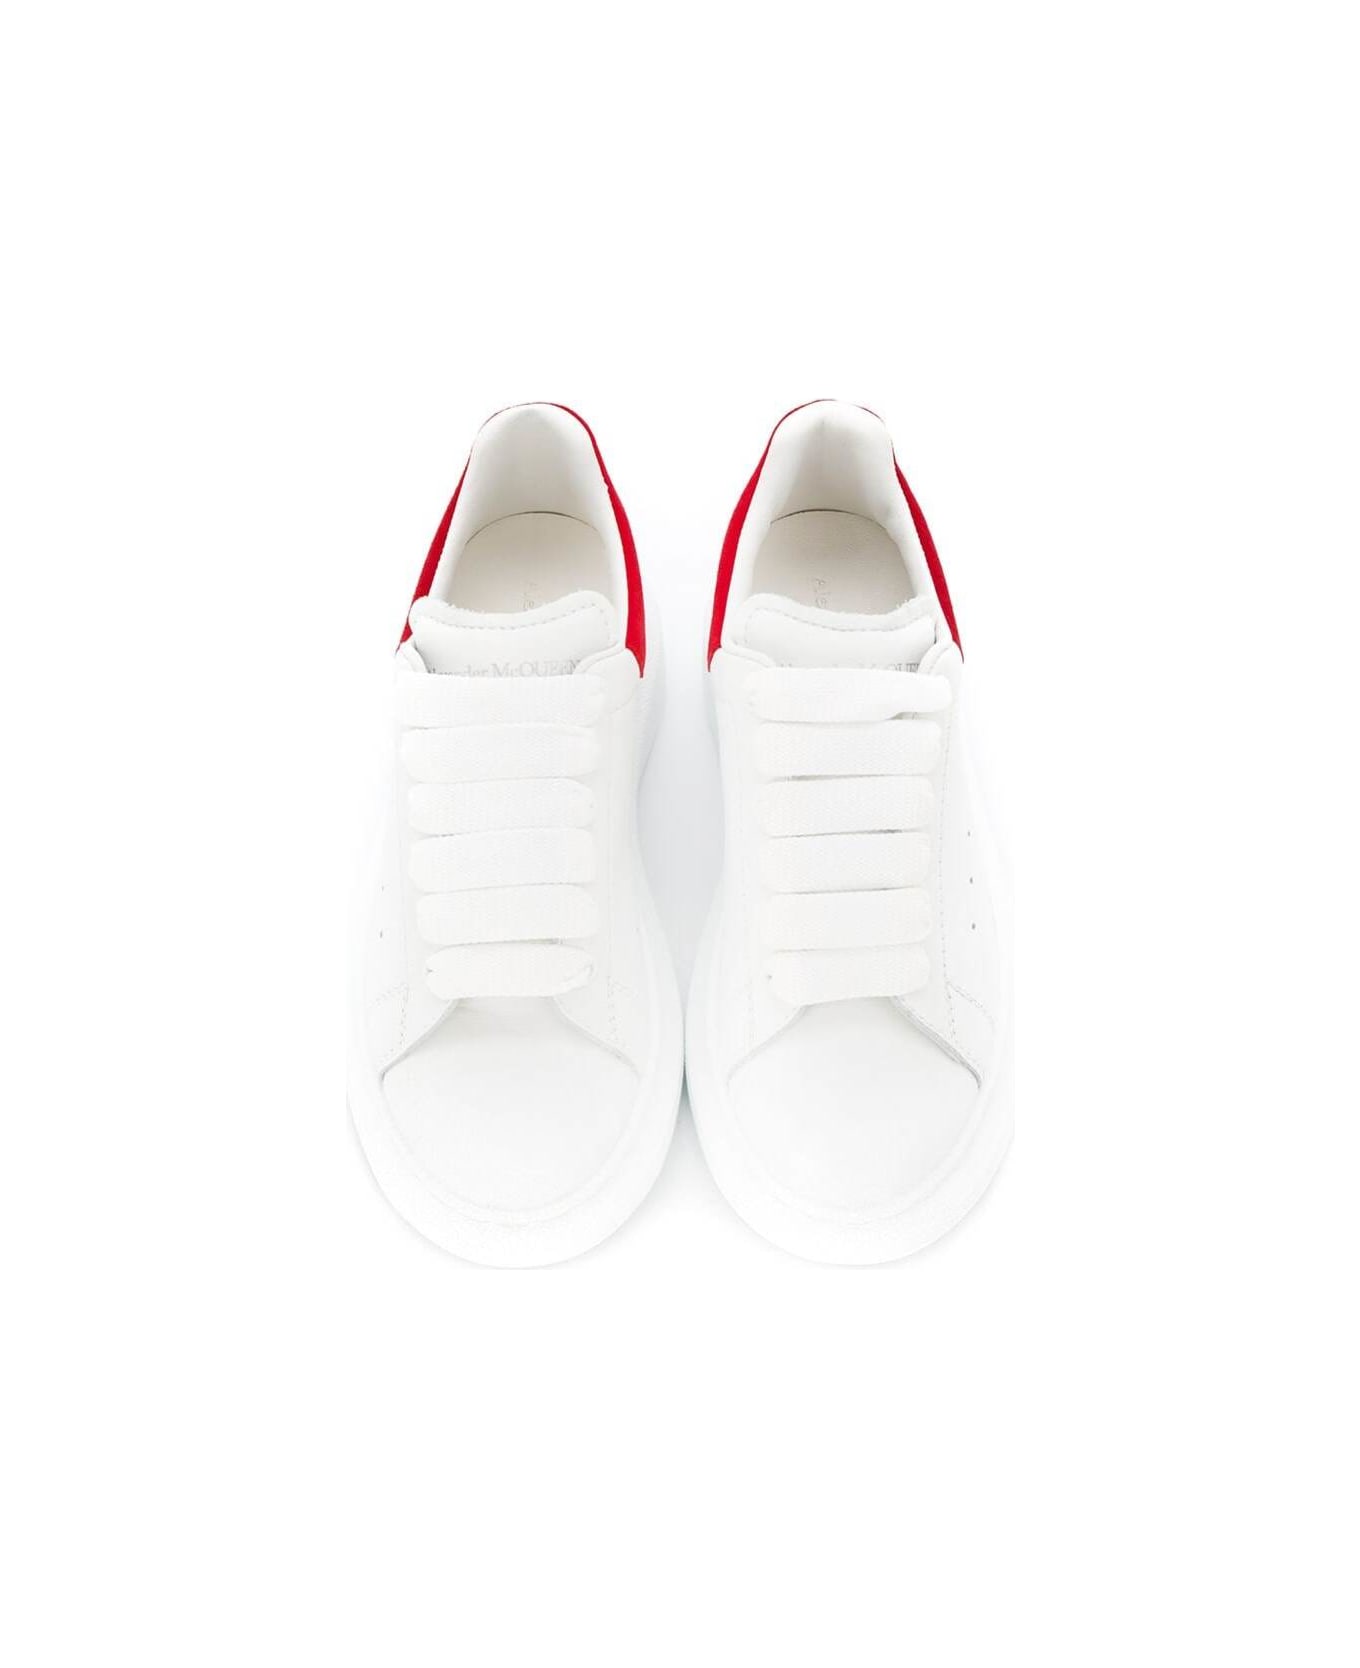 Alexander McQueen White Leather Oversize Sneakers With Red Heel Tab - White